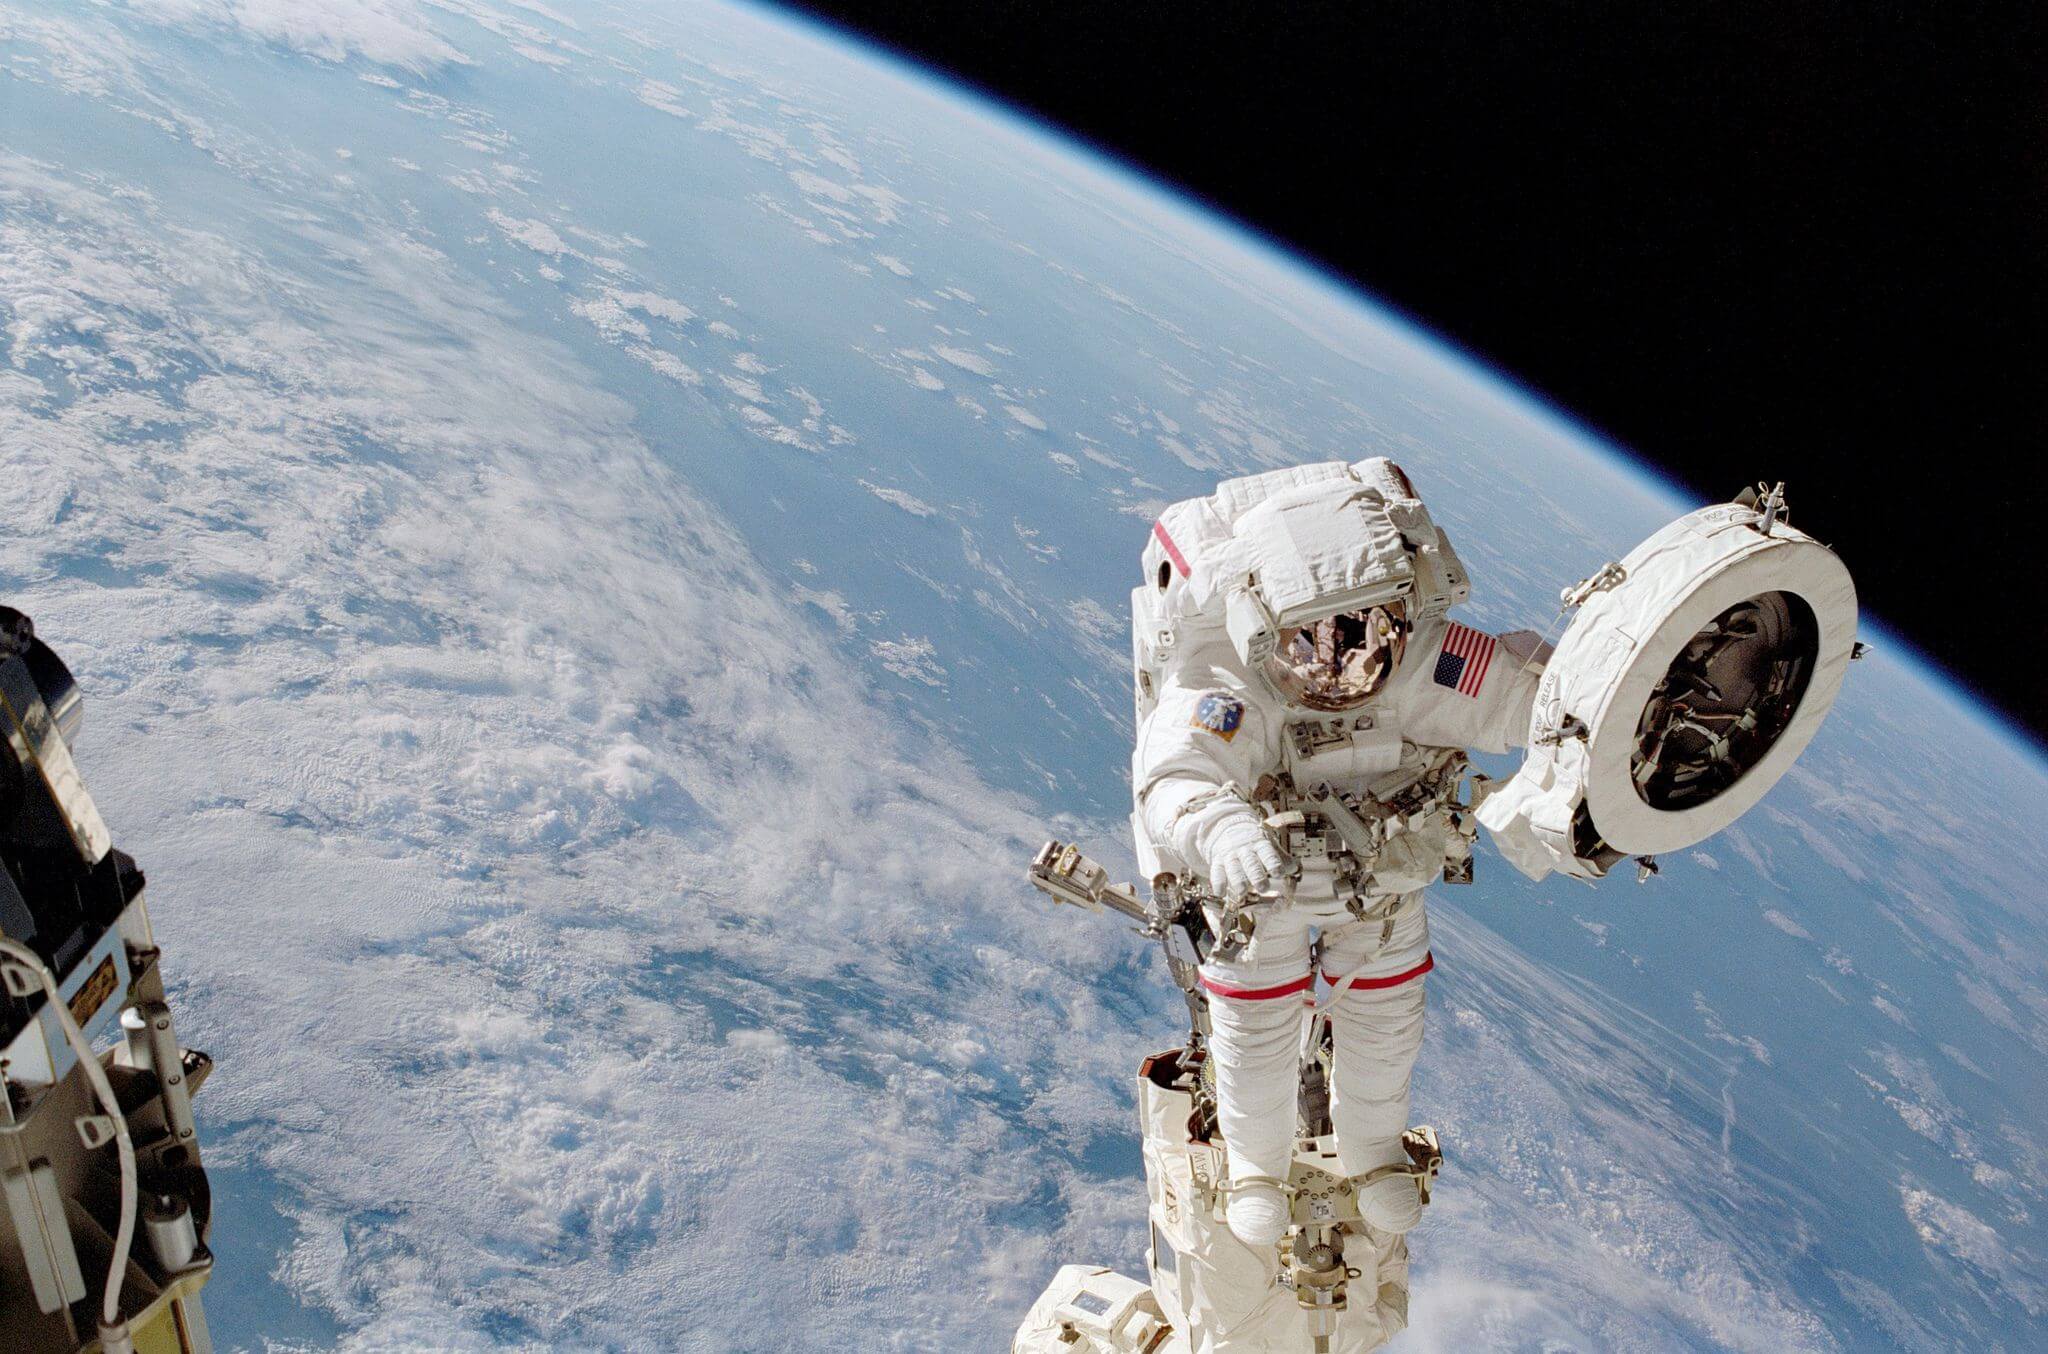 Space flight can be more dangerous for people than anticipated